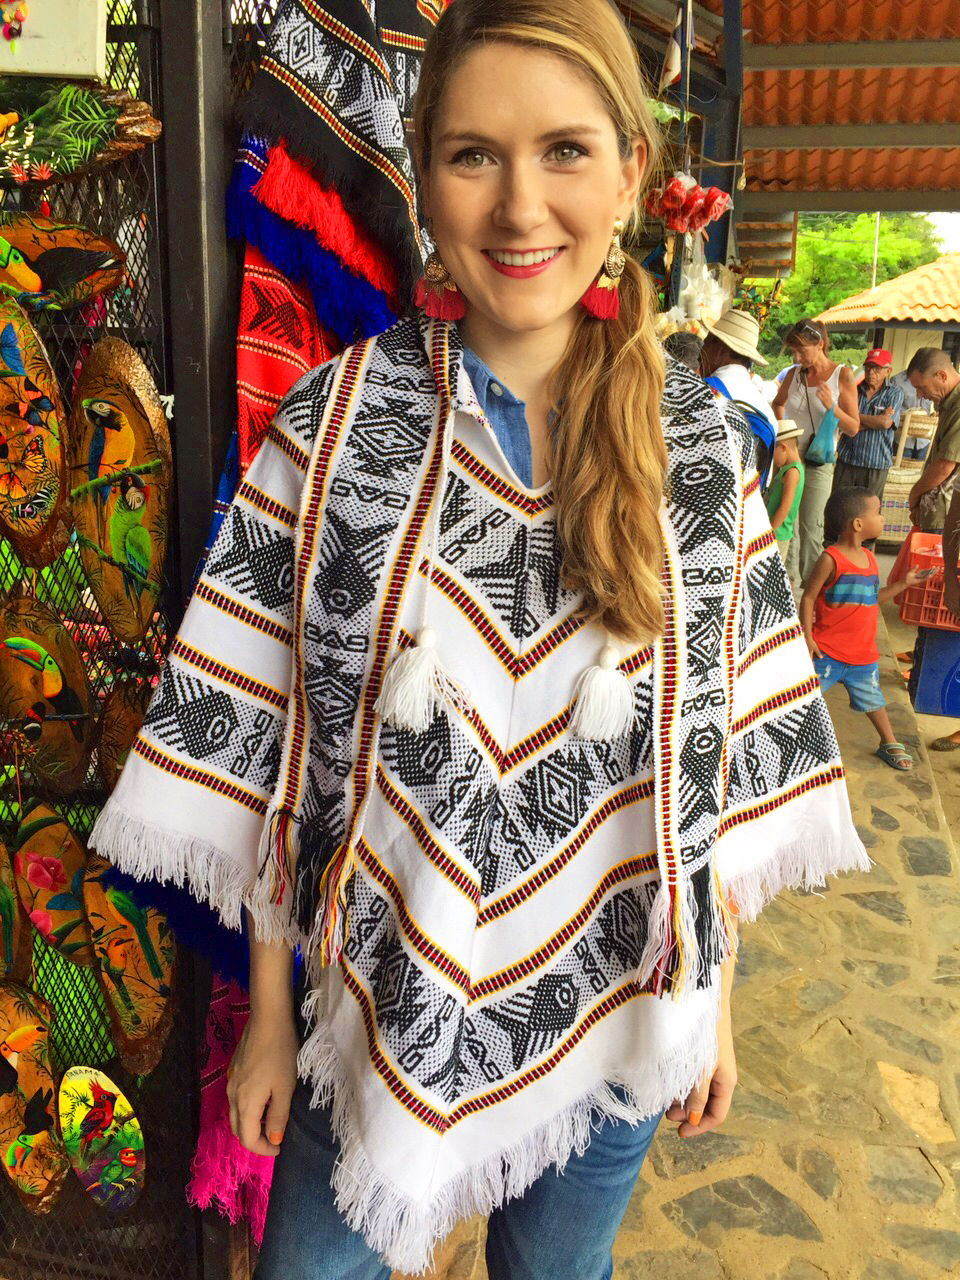 Loving this poncho from the markets of El Valle, Panama